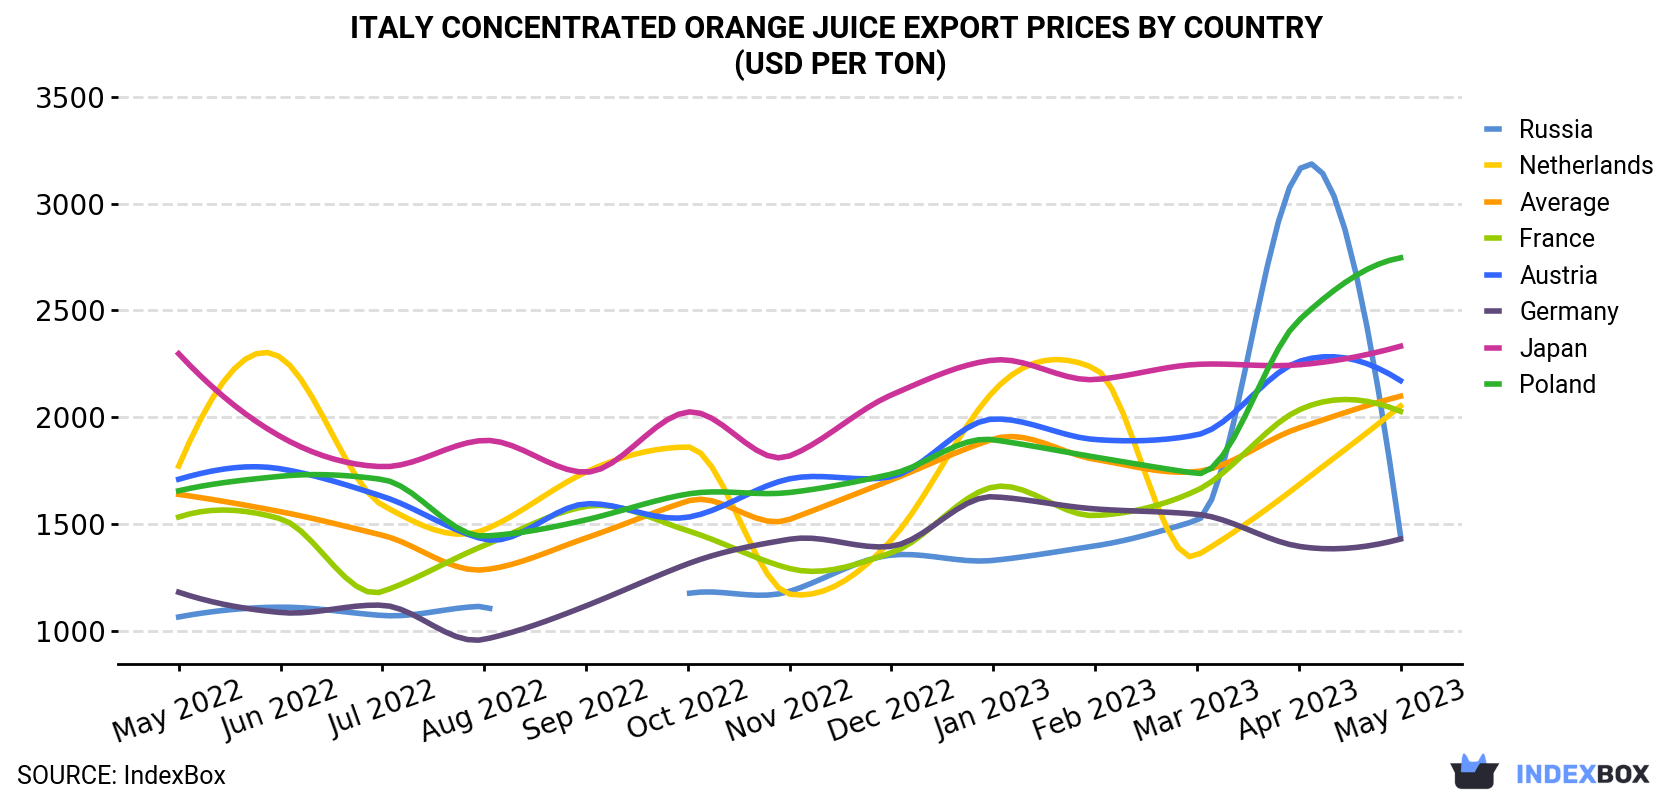 Italy Concentrated Orange Juice Export Prices By Country (USD Per Ton)